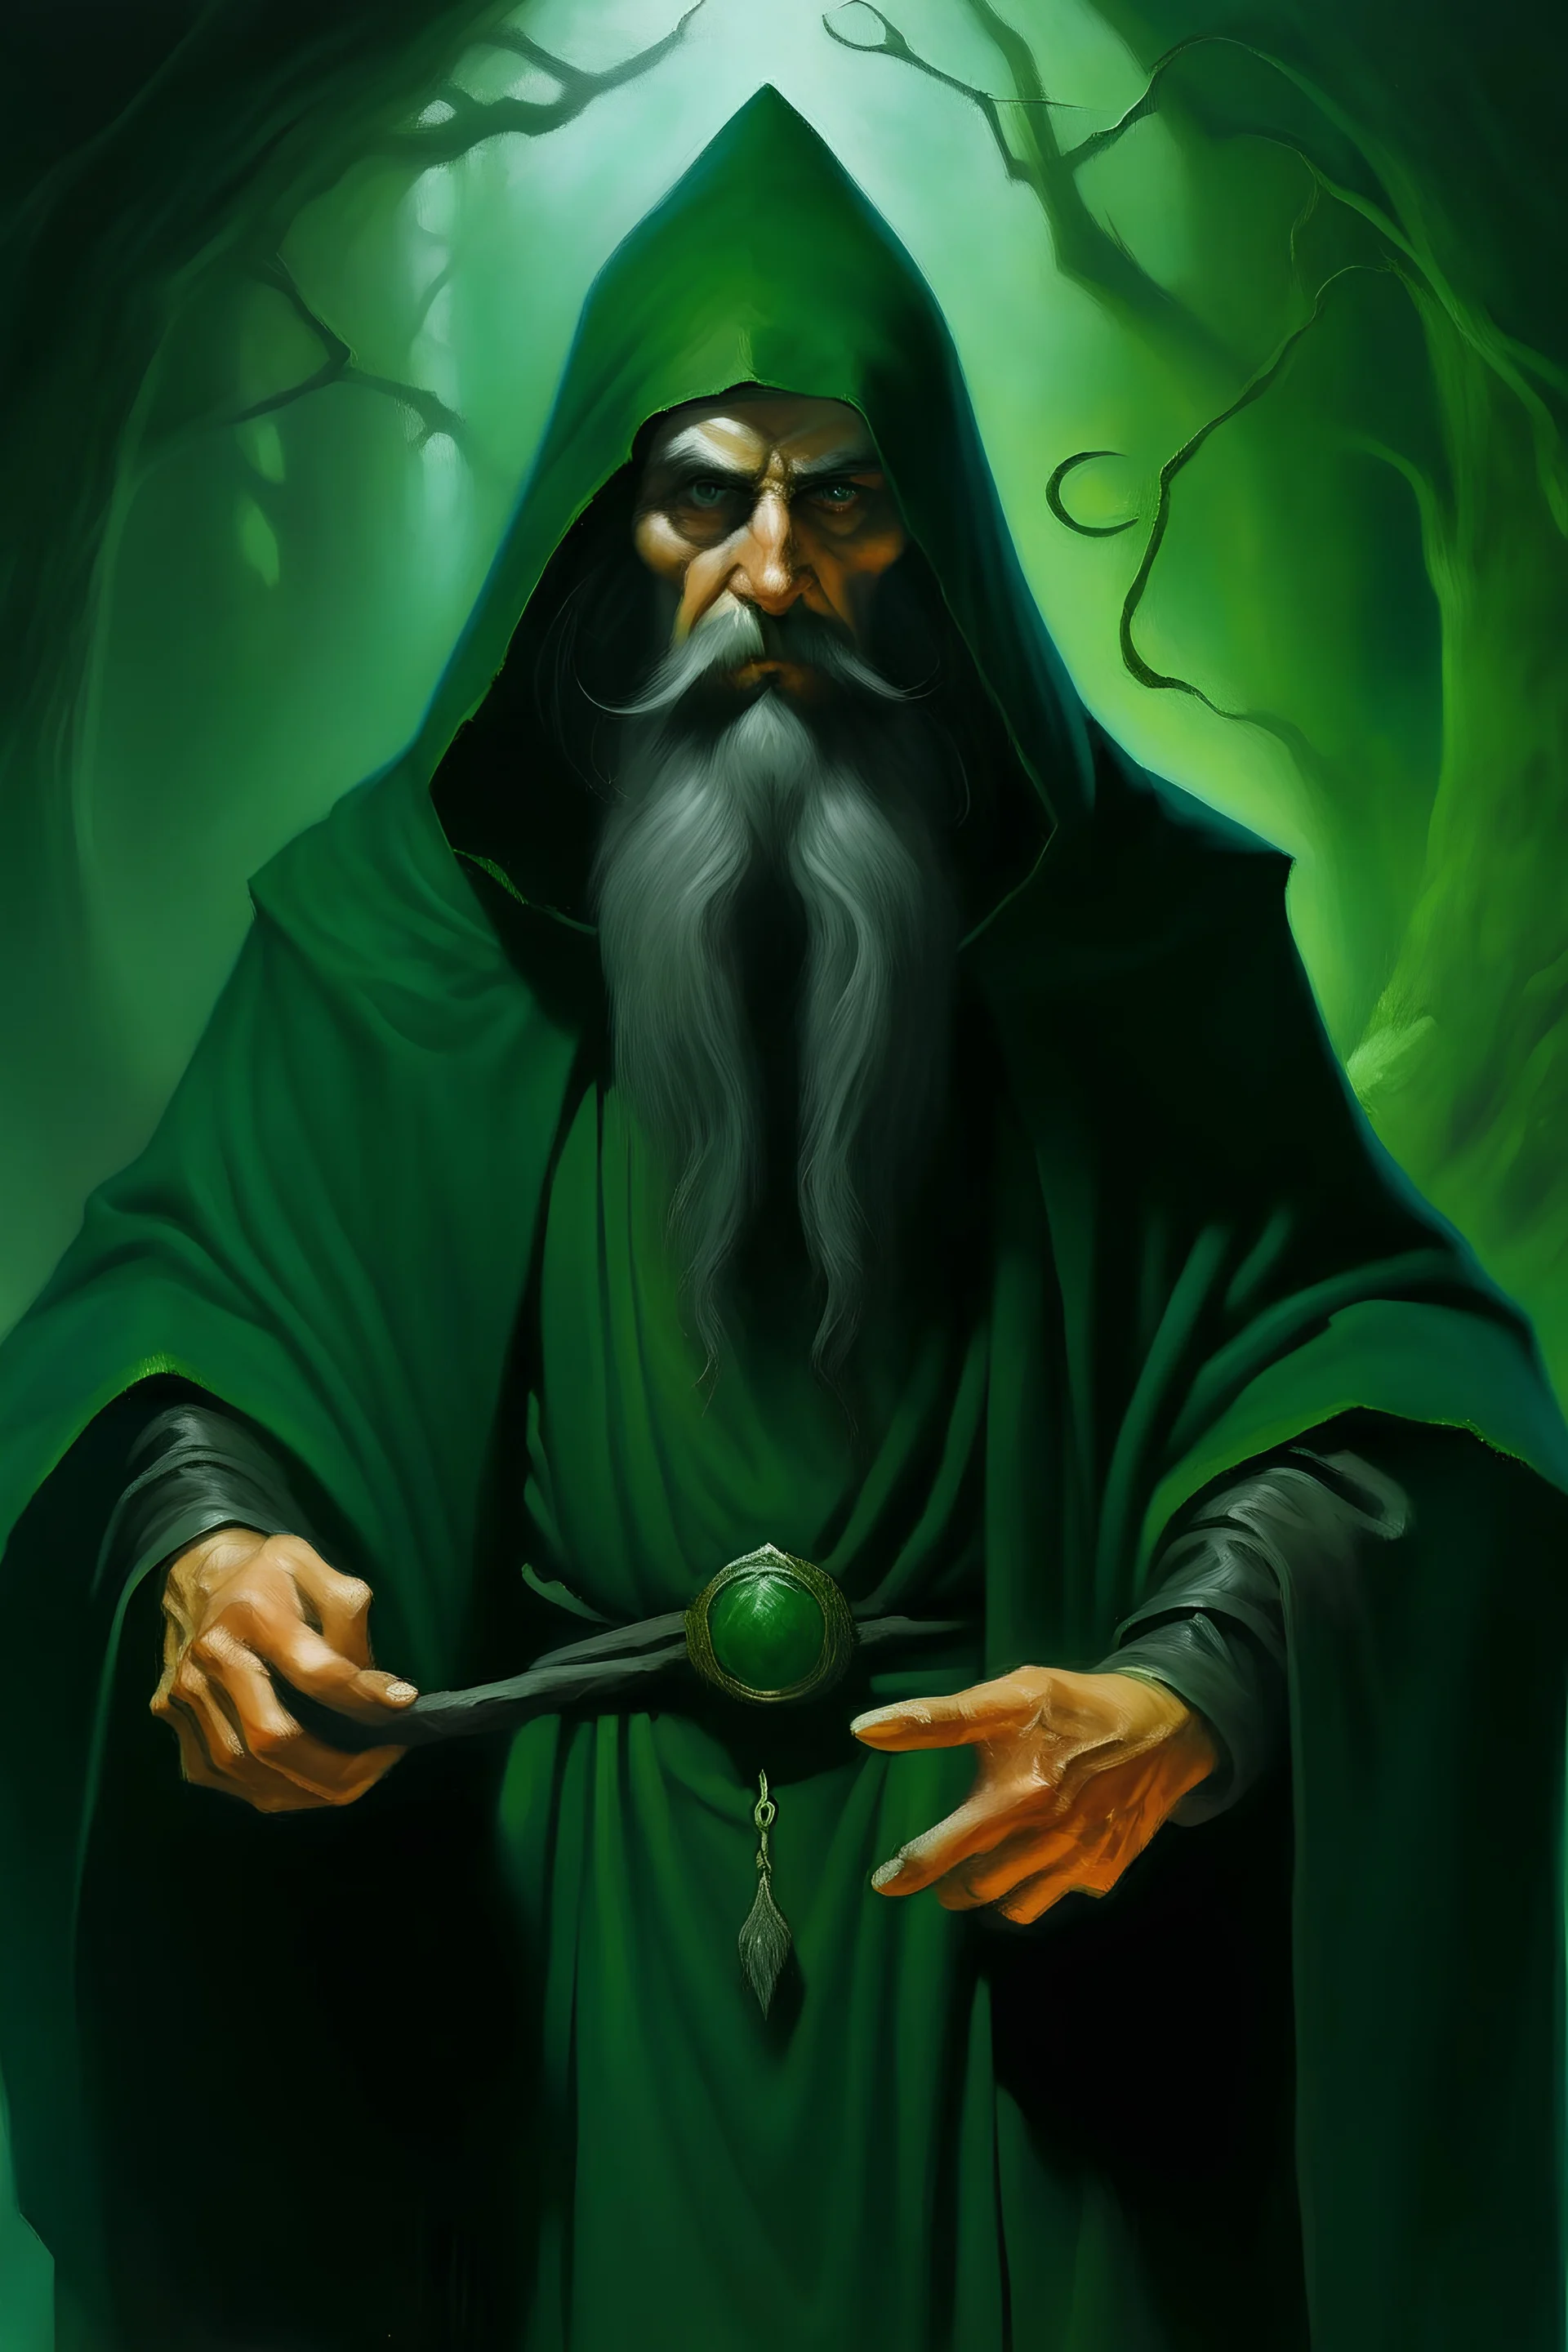 1970's dark fantasy cover dnd style oil painting of an old herbalist rasputin like hero using a dark green cloack with sport outfits with minimalist far perspective. Magazine.